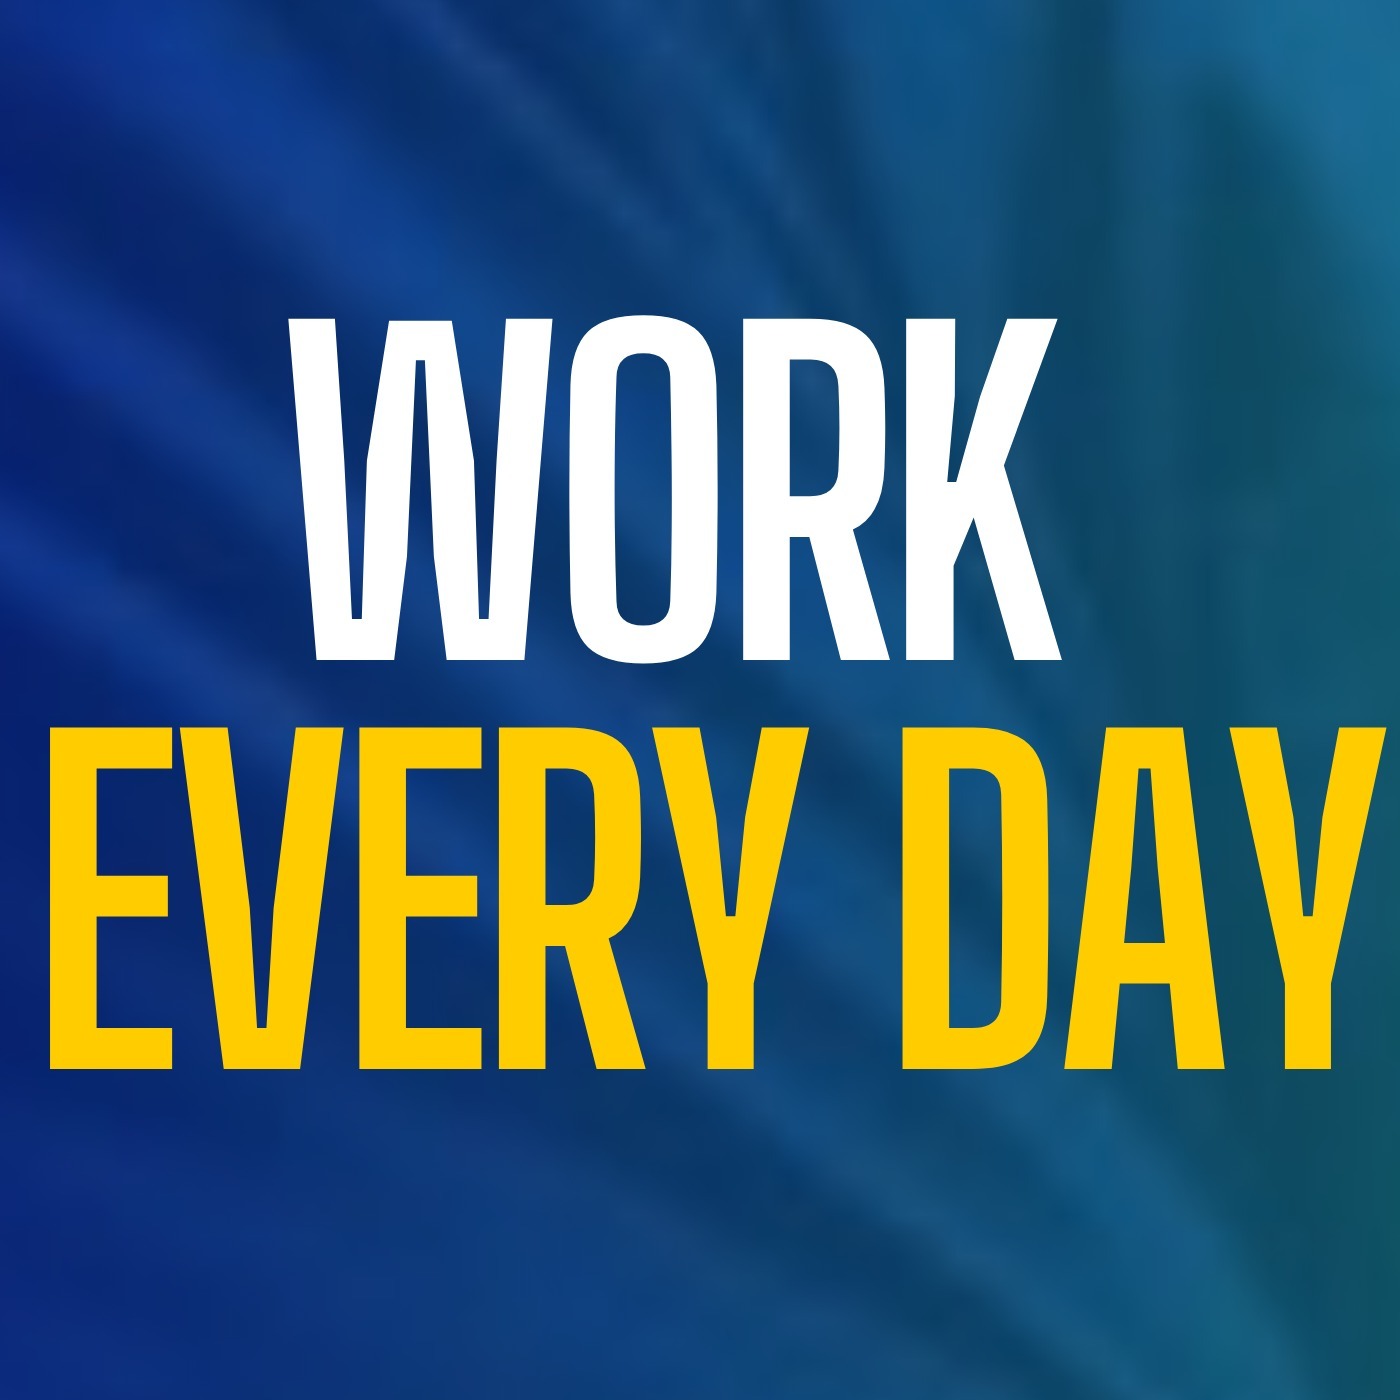 WORK EVERY DAY - Andrew Tate Motivational Speech